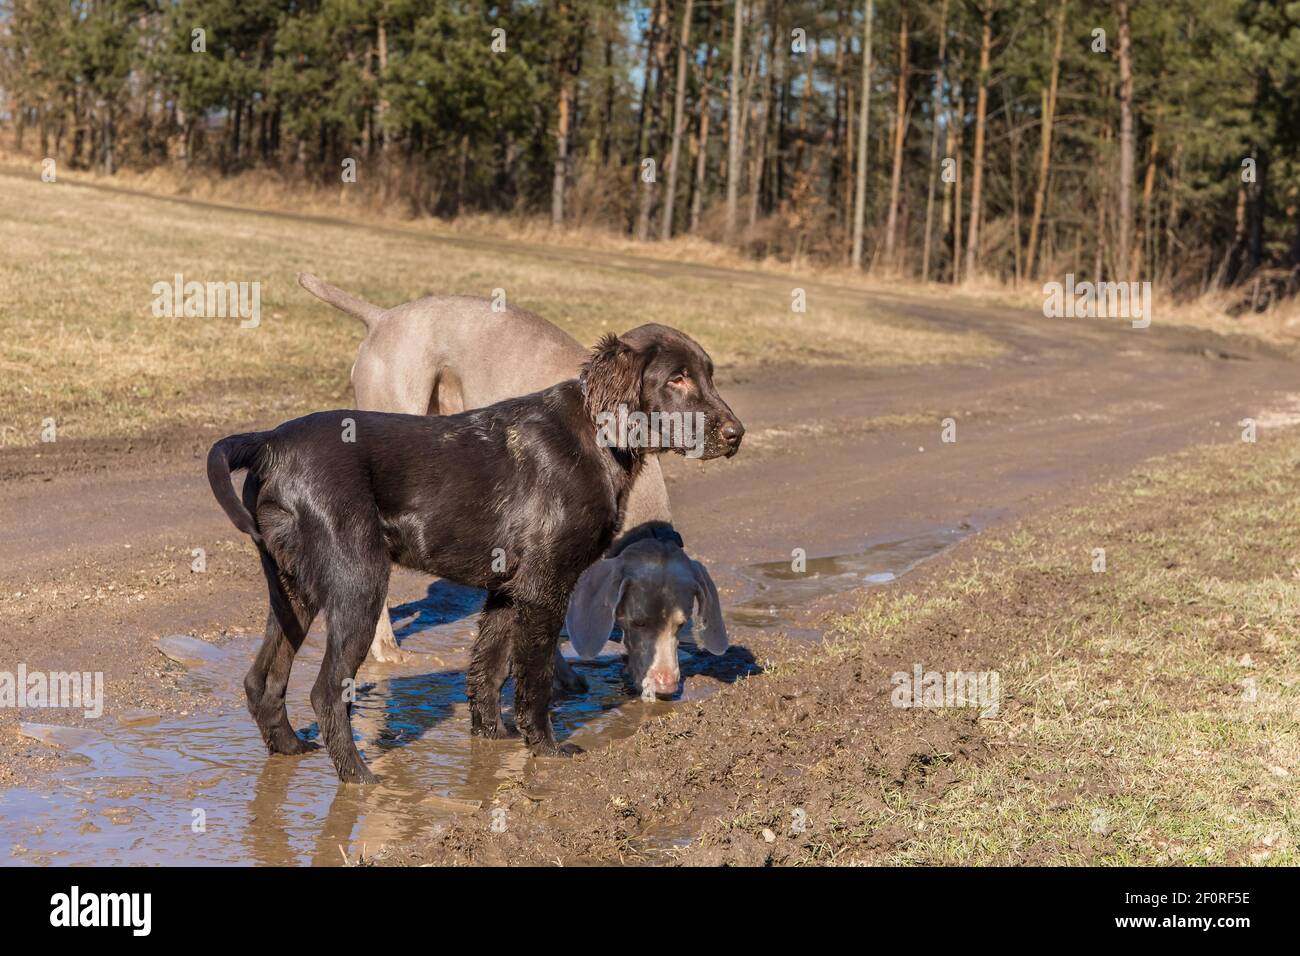 Brown flat coated retriever puppy and Weimaraner playing in the mud on a dirt road. Dirty dog. Stock Photo